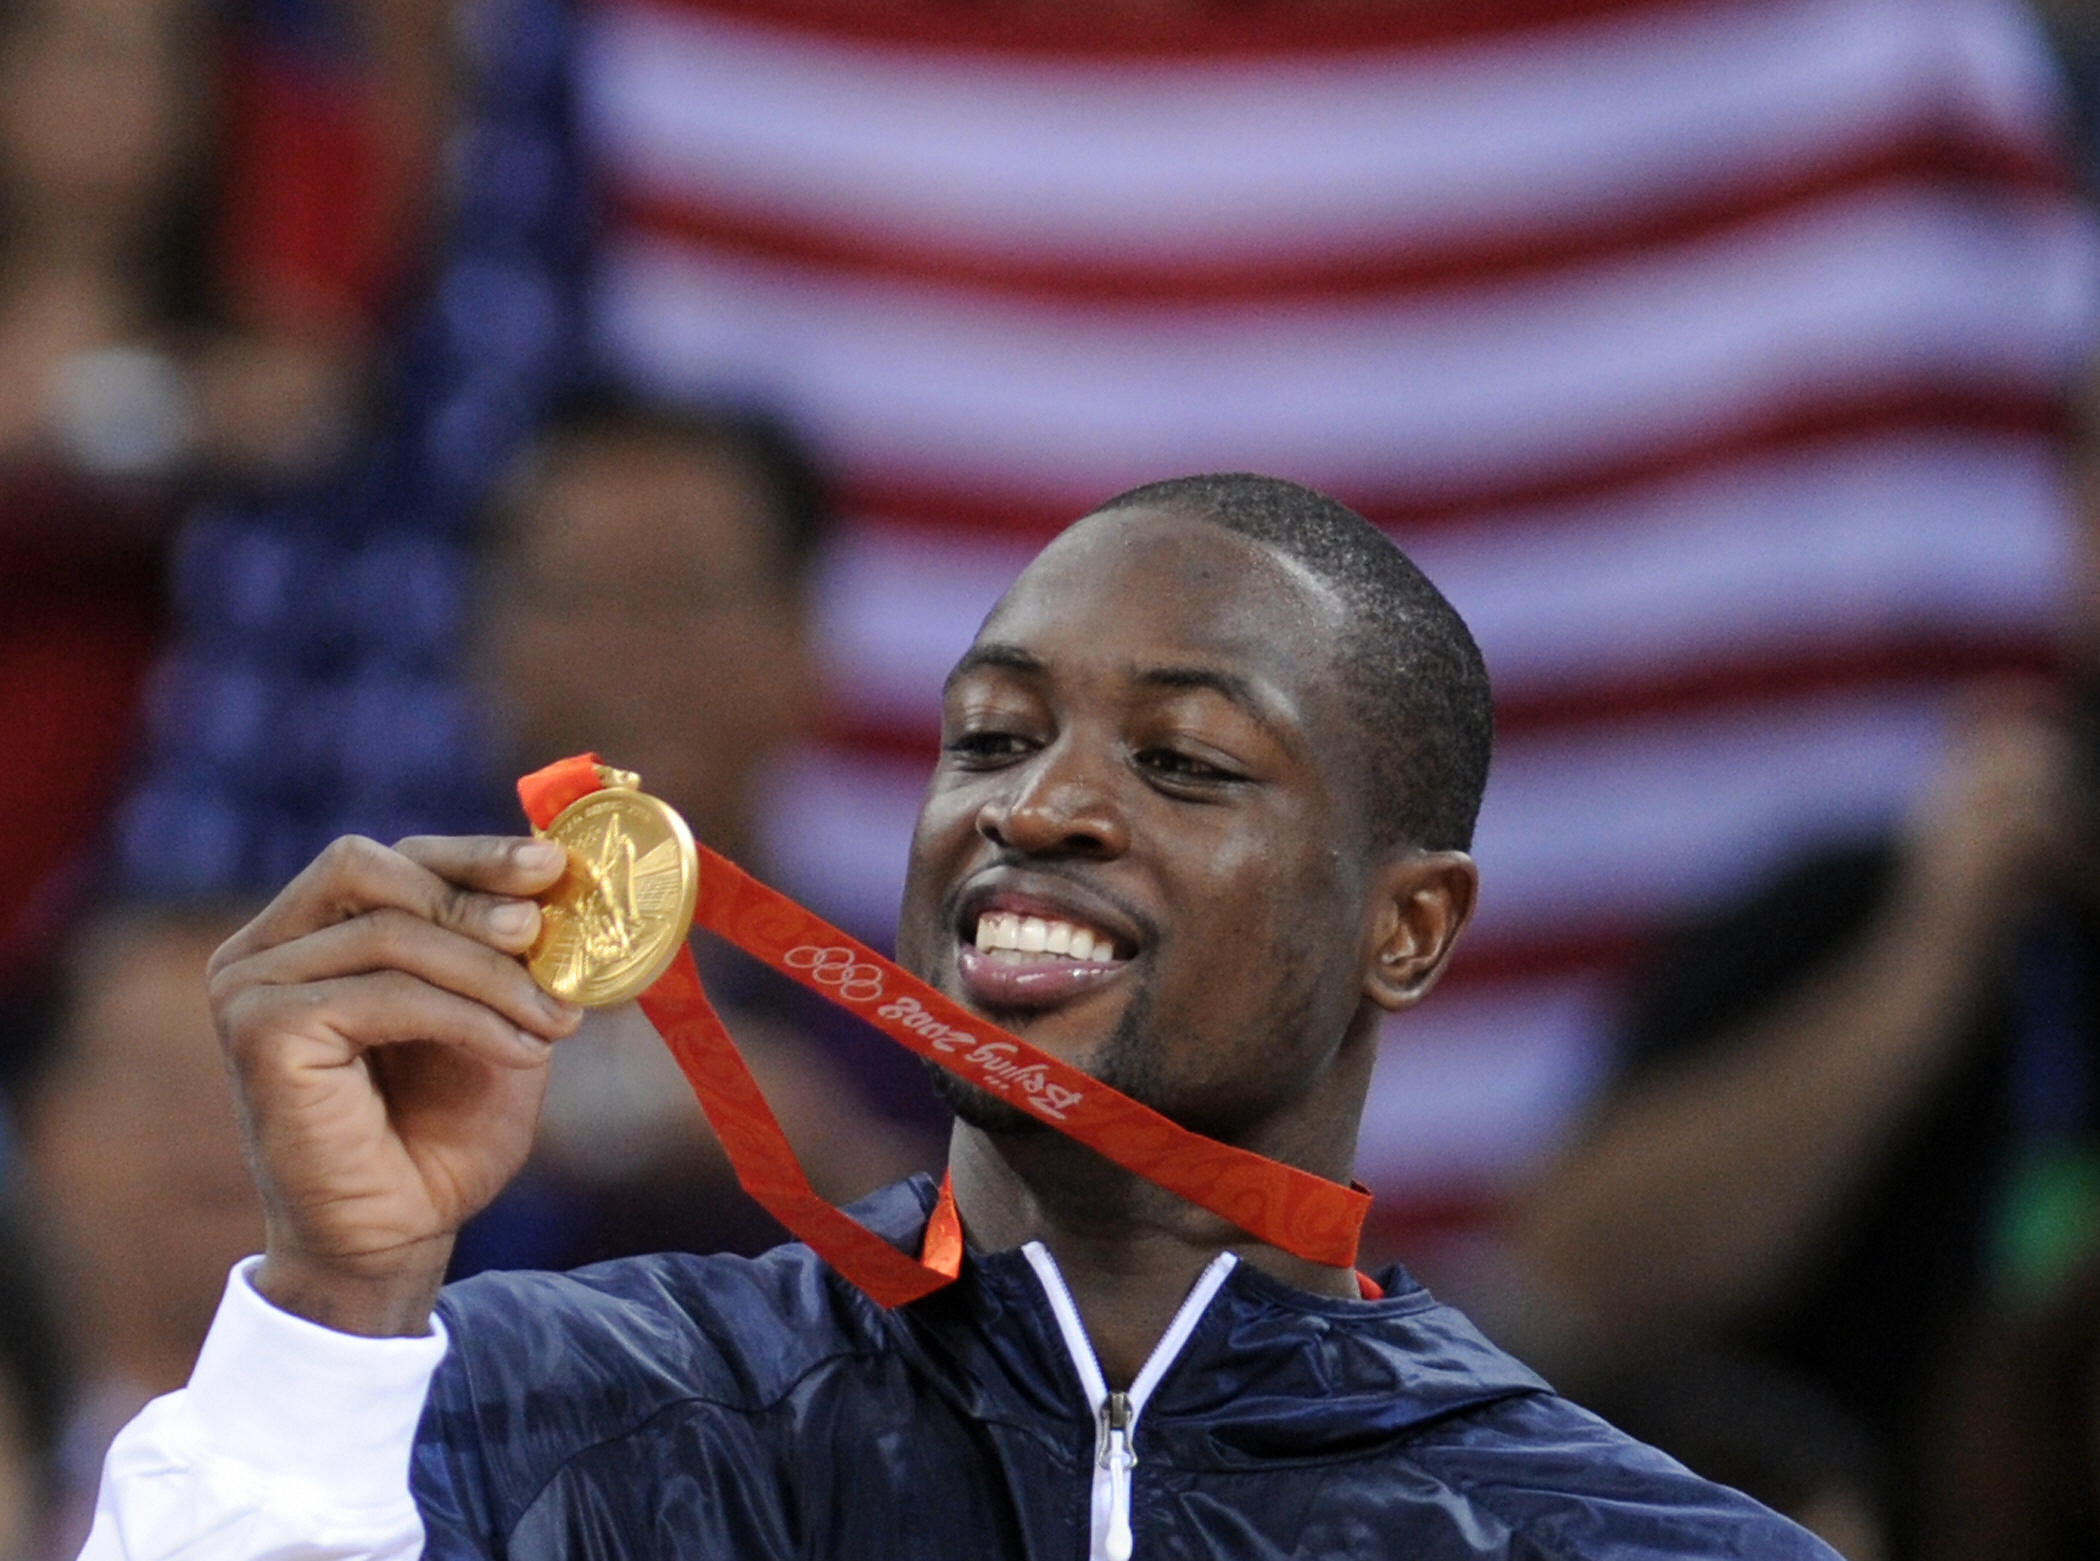 USA's Dwyane Wade shows his medals on the podium after the men's basketball gold medal match of the Beijing 2008 Olympic Games on August 24, 2008 at the Olympic basketball Arena in Beijing. The United States won the Olympic men's basketball gold medal defeating Spain 118-107. (FILIPPO MONTEFORTE/AFP via Getty Images)